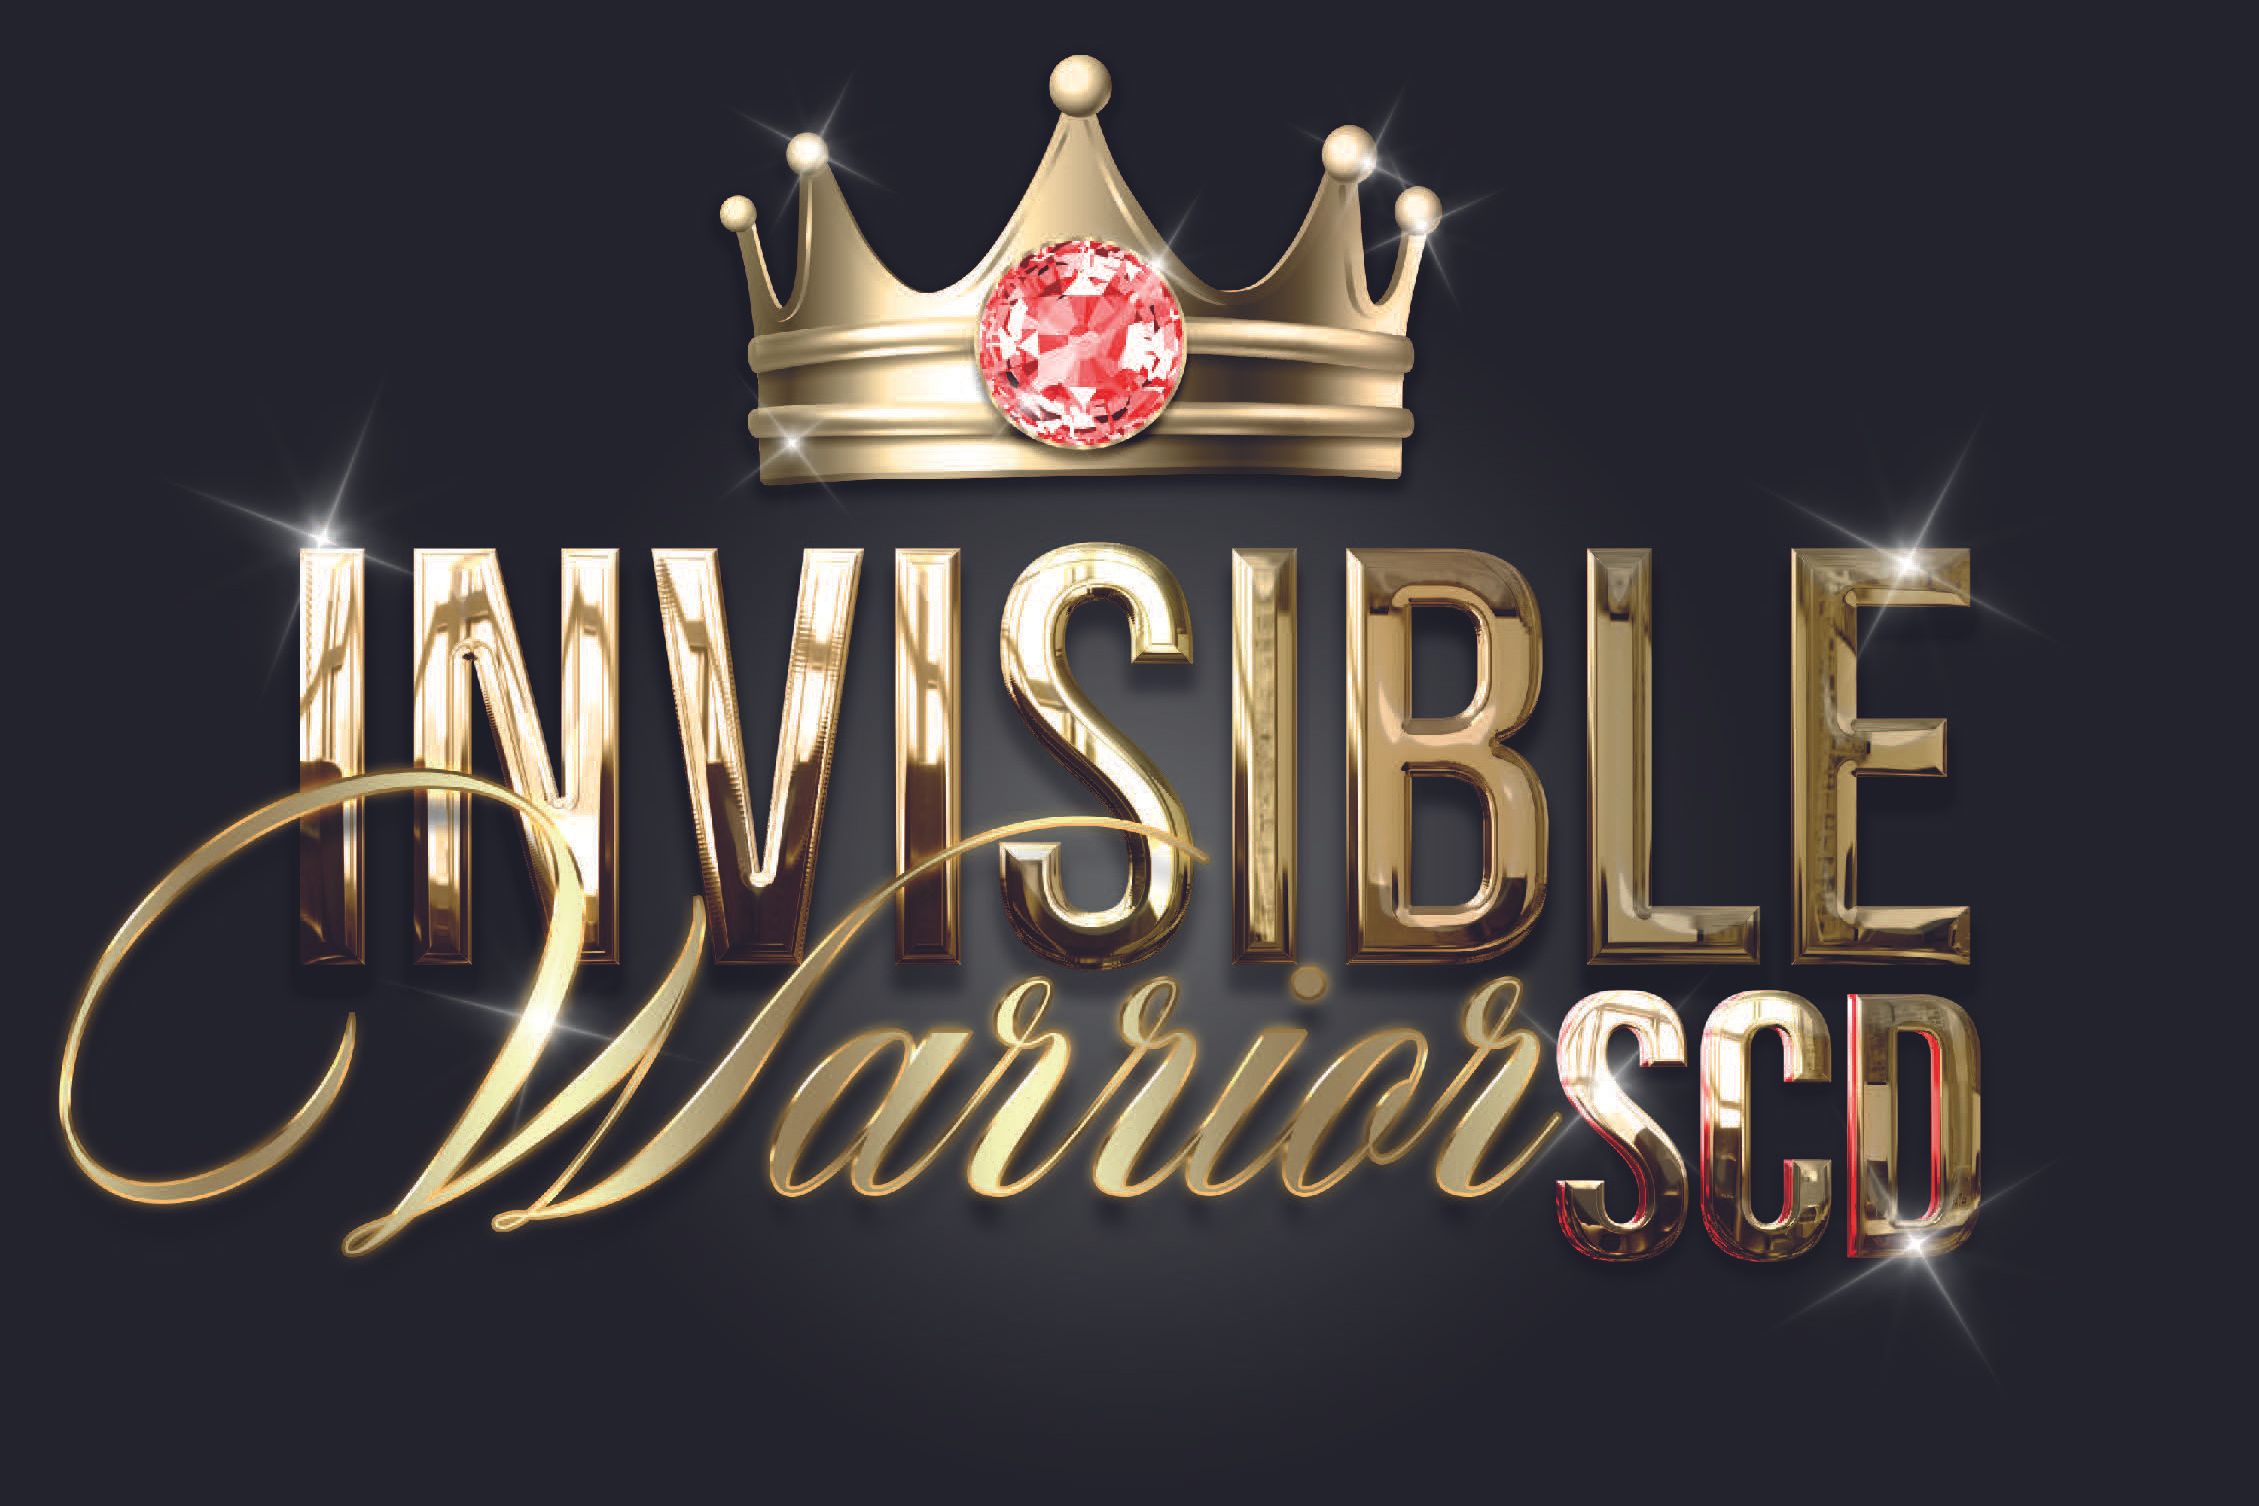 Invisible Warrior project logo